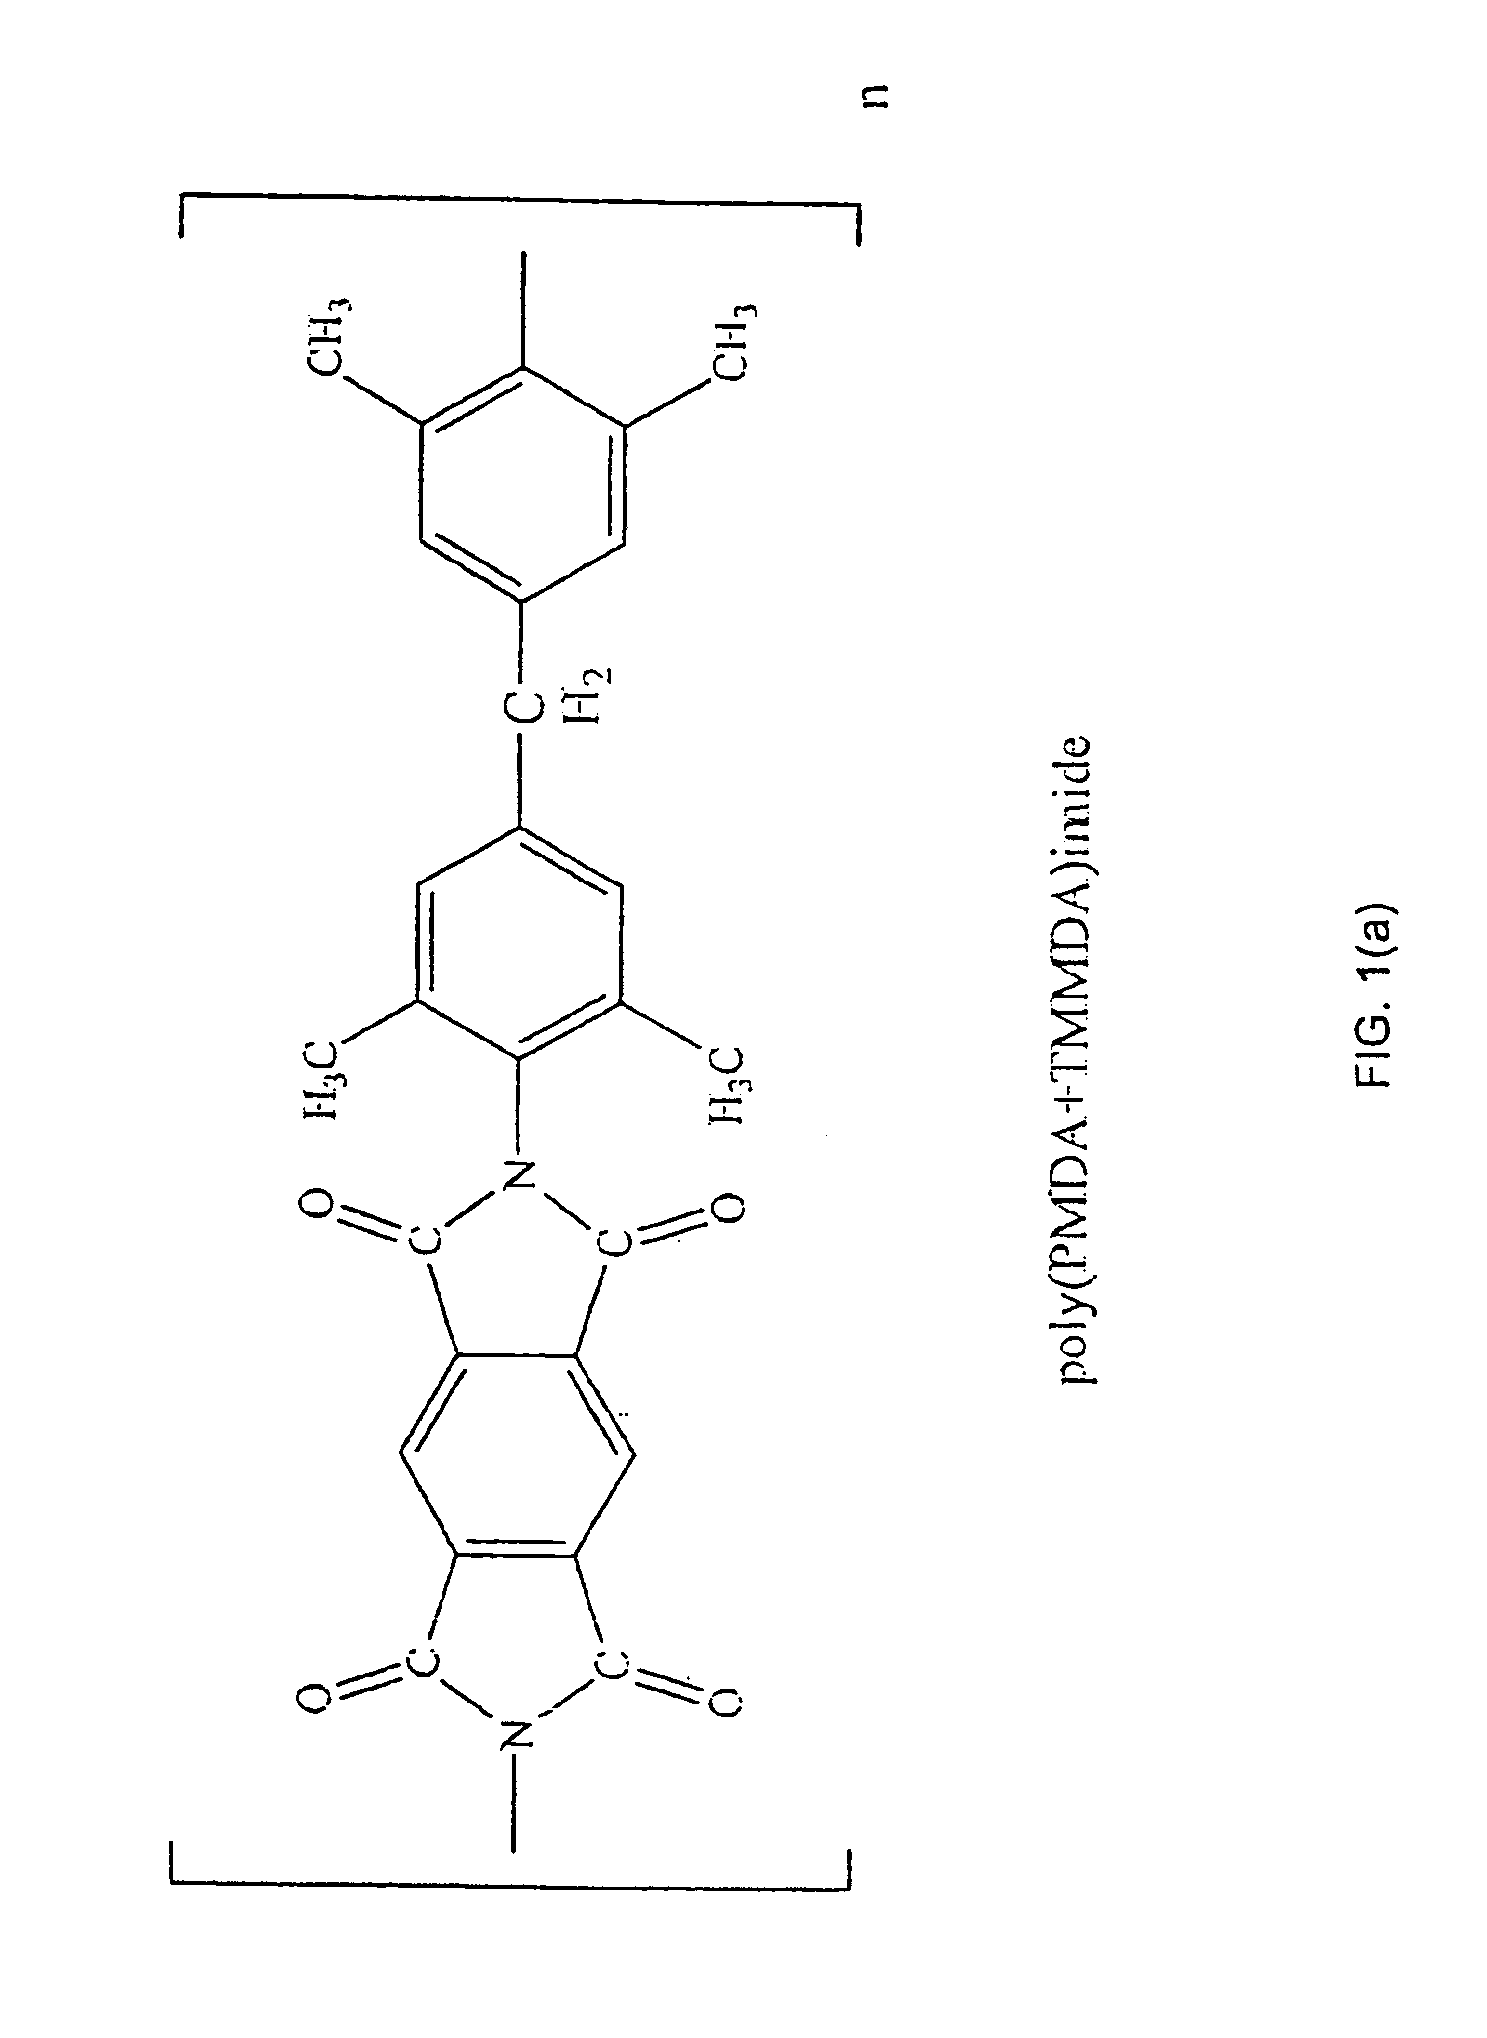 Card with embedded IC and electrochemical cell